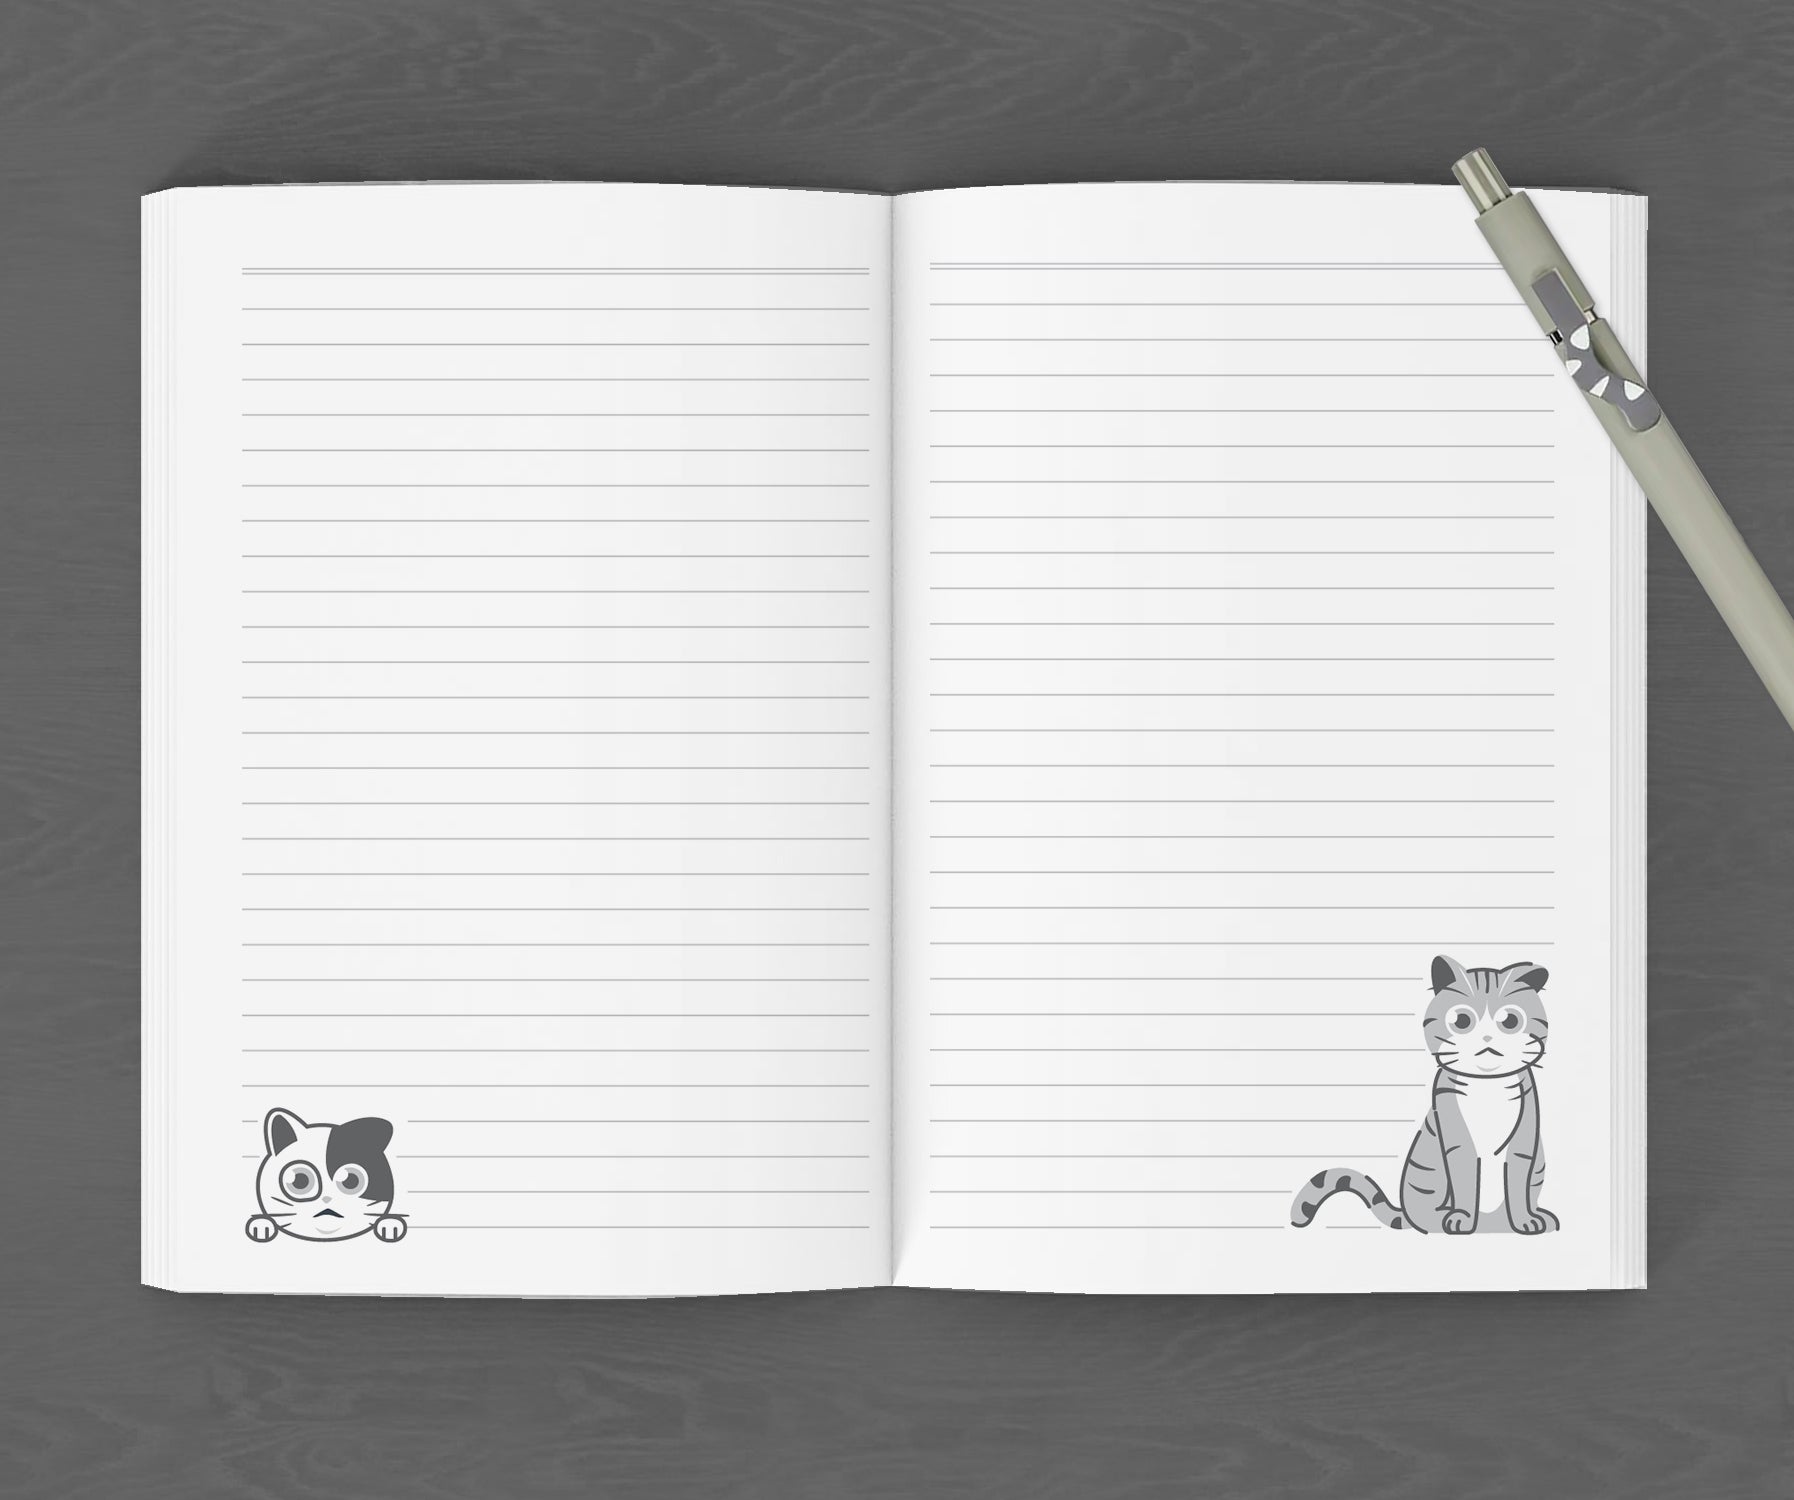 CAT NOTEBOOK: Fluffy Ginger White Cat Journal Notebook with Interior  Motifs. Perfect for Cat Lovers. 6 x 9 in. Blank lined. (Cat Notebooks)